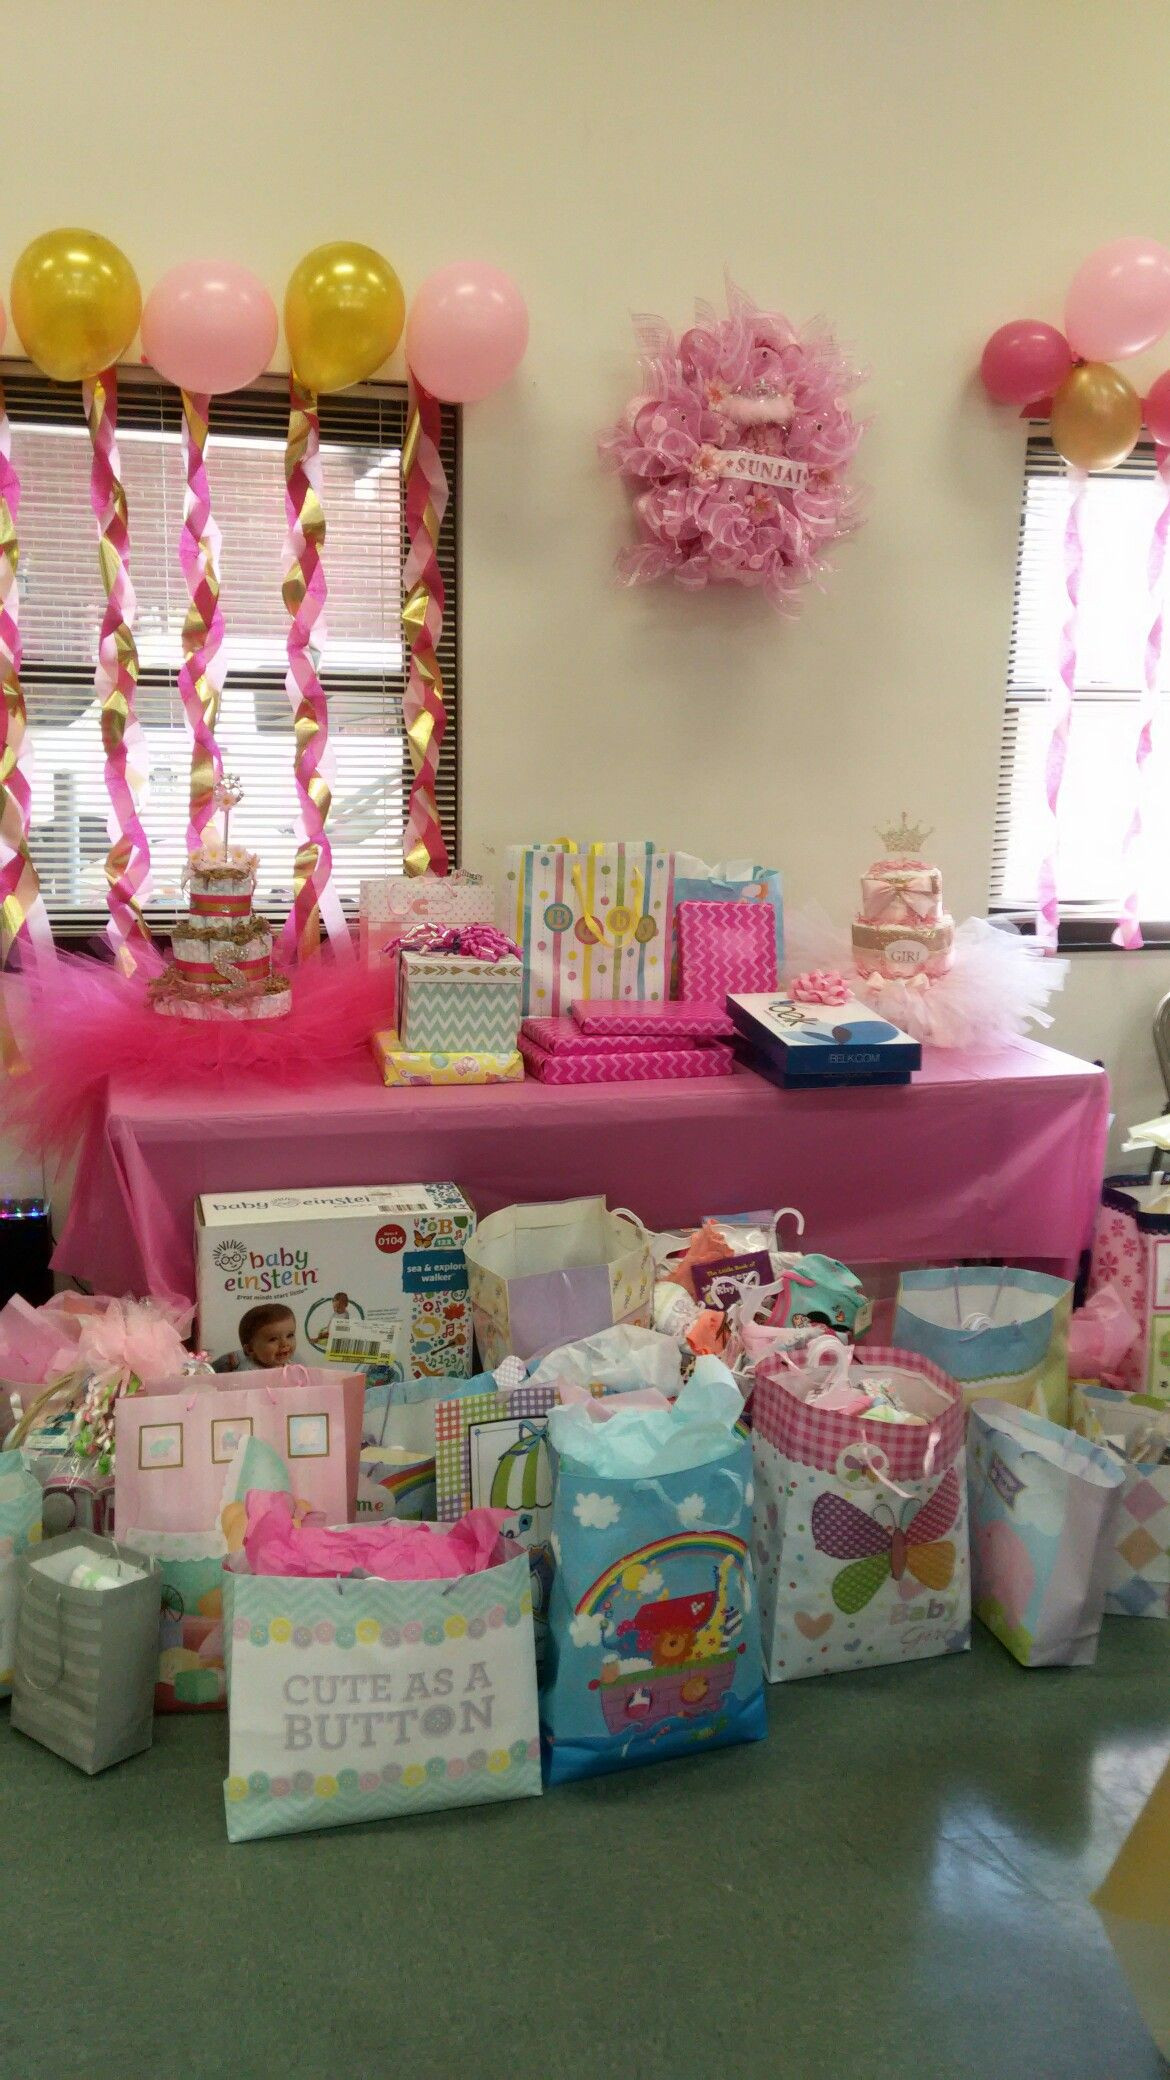 Gift Table Ideas For Baby Shower
 My niece s baby shower t table in 2019